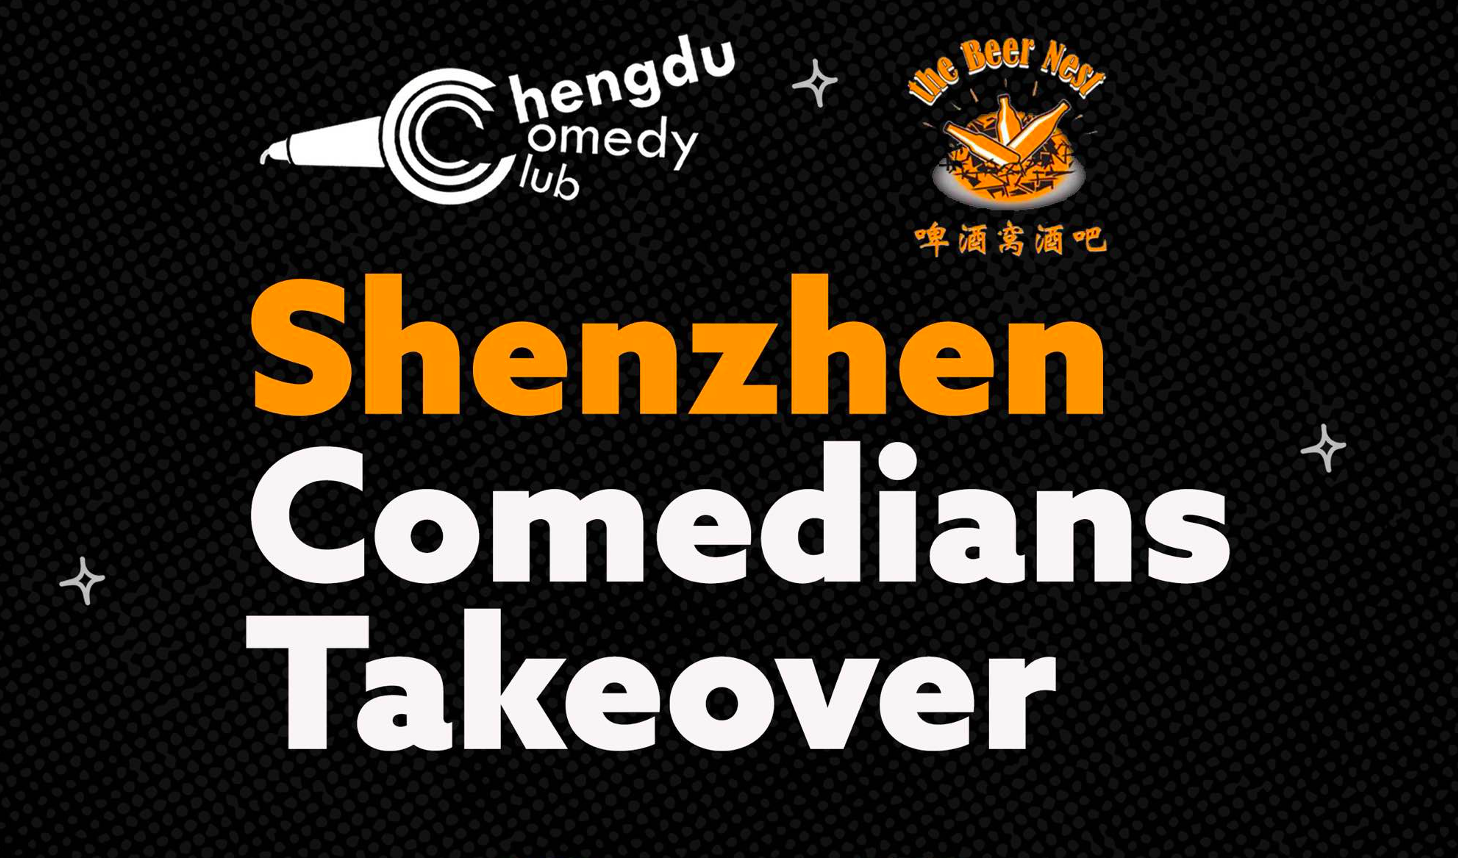 Shenzhen Comedians Takeover featured 1